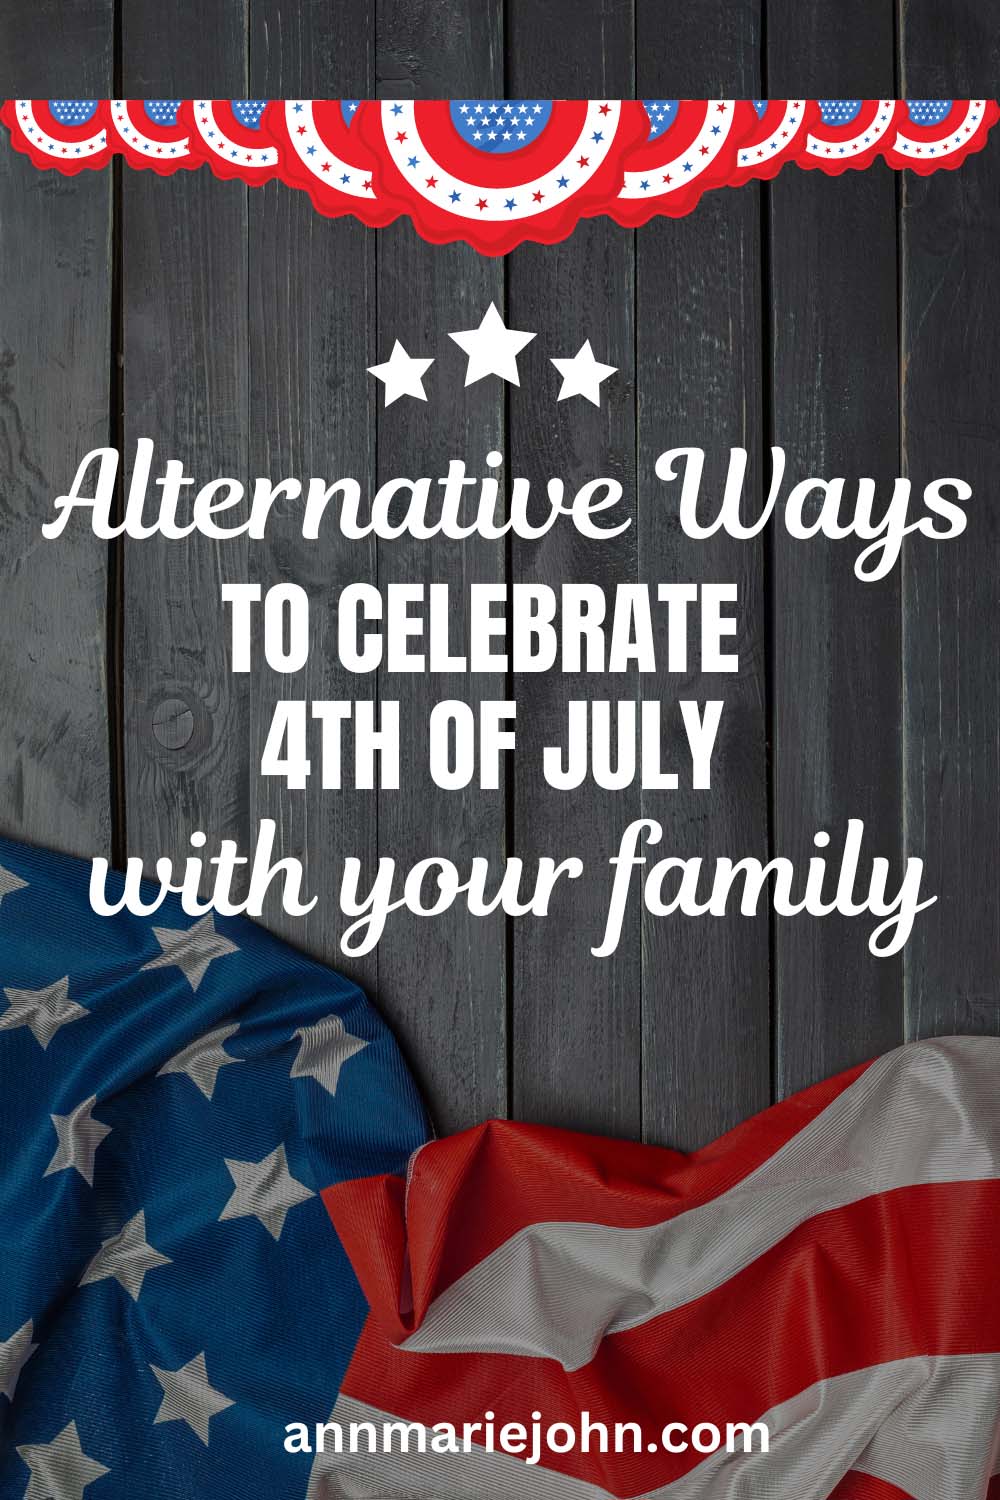 Alternative Ways to Celebrate 4th of July with your Family